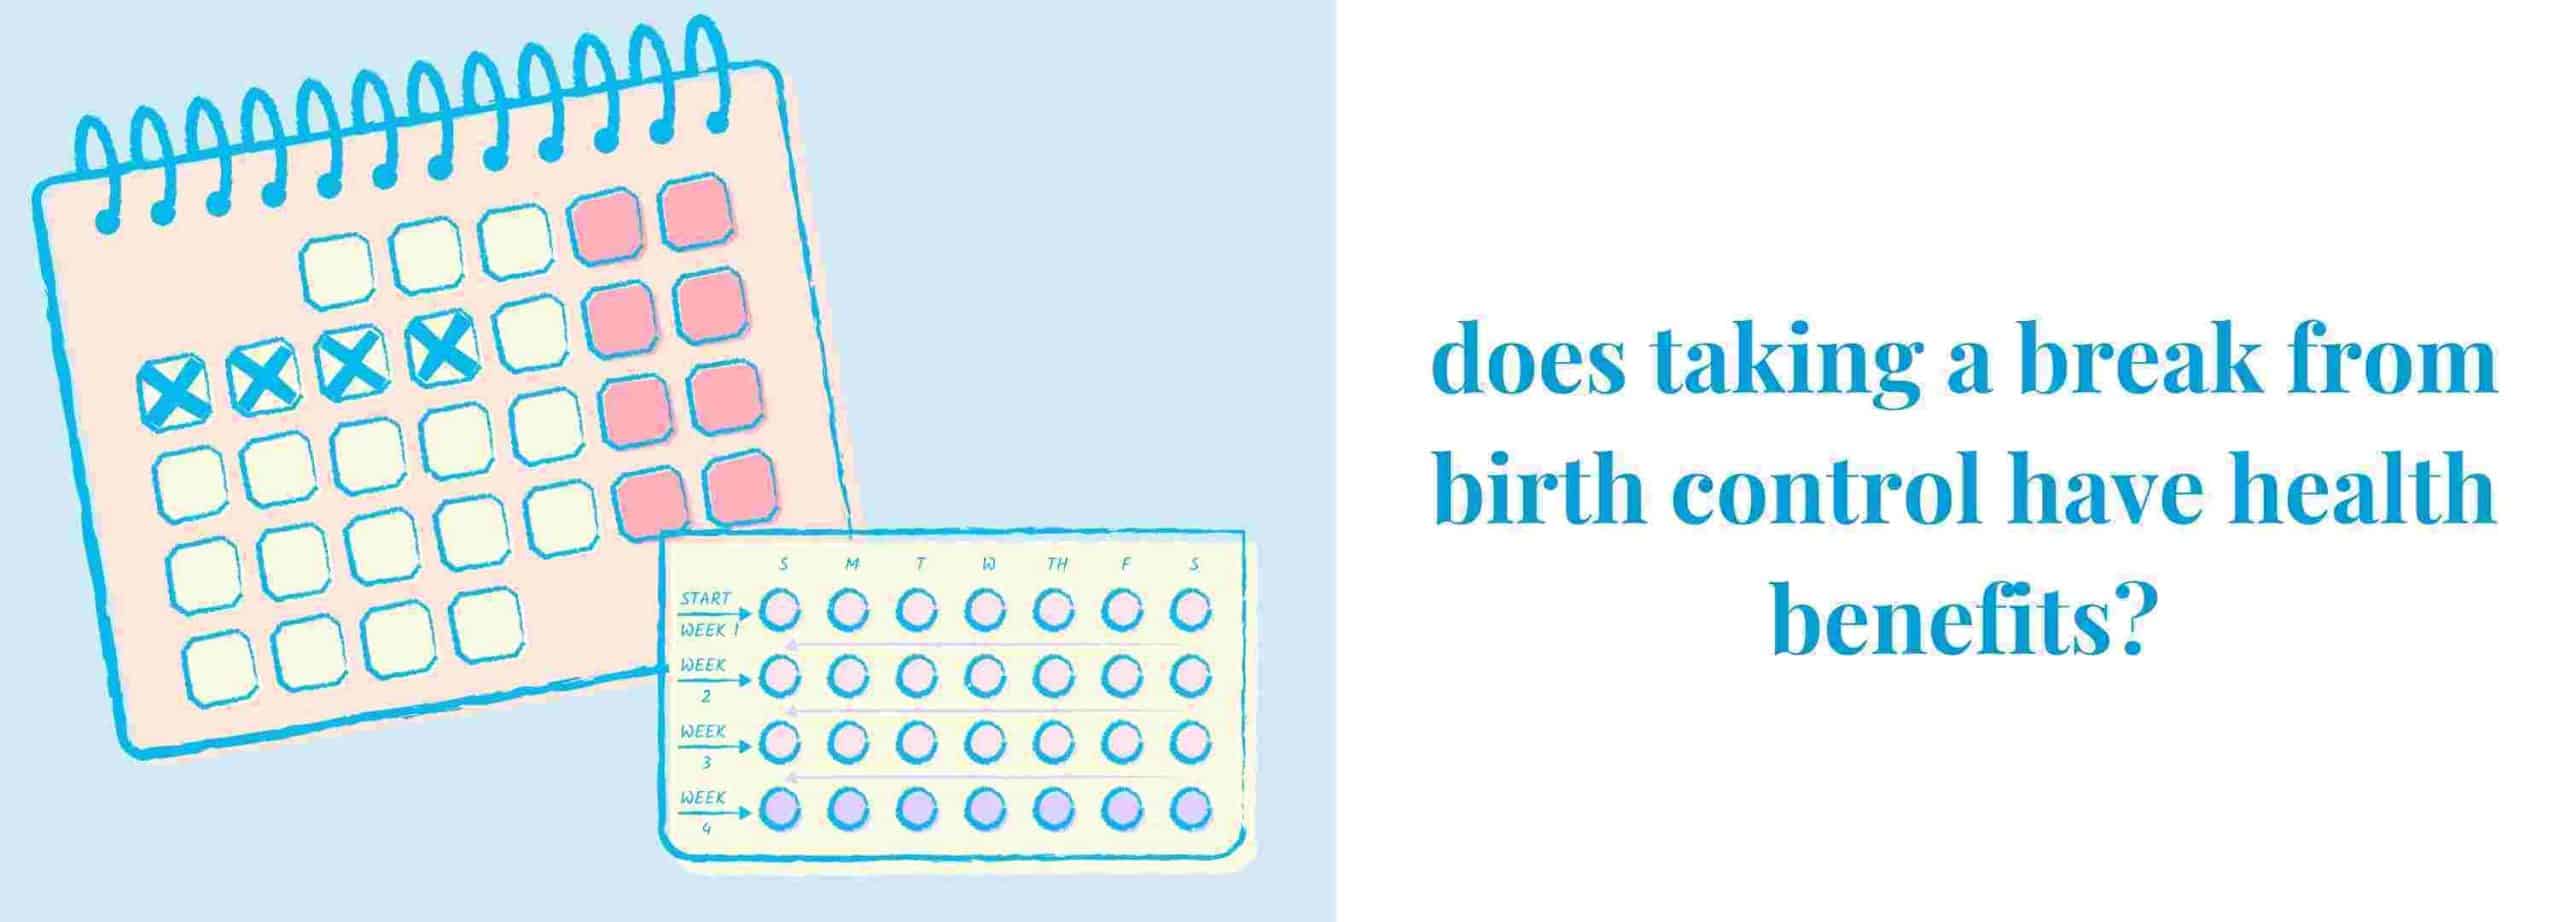 does taking a break from birth control has health benefits